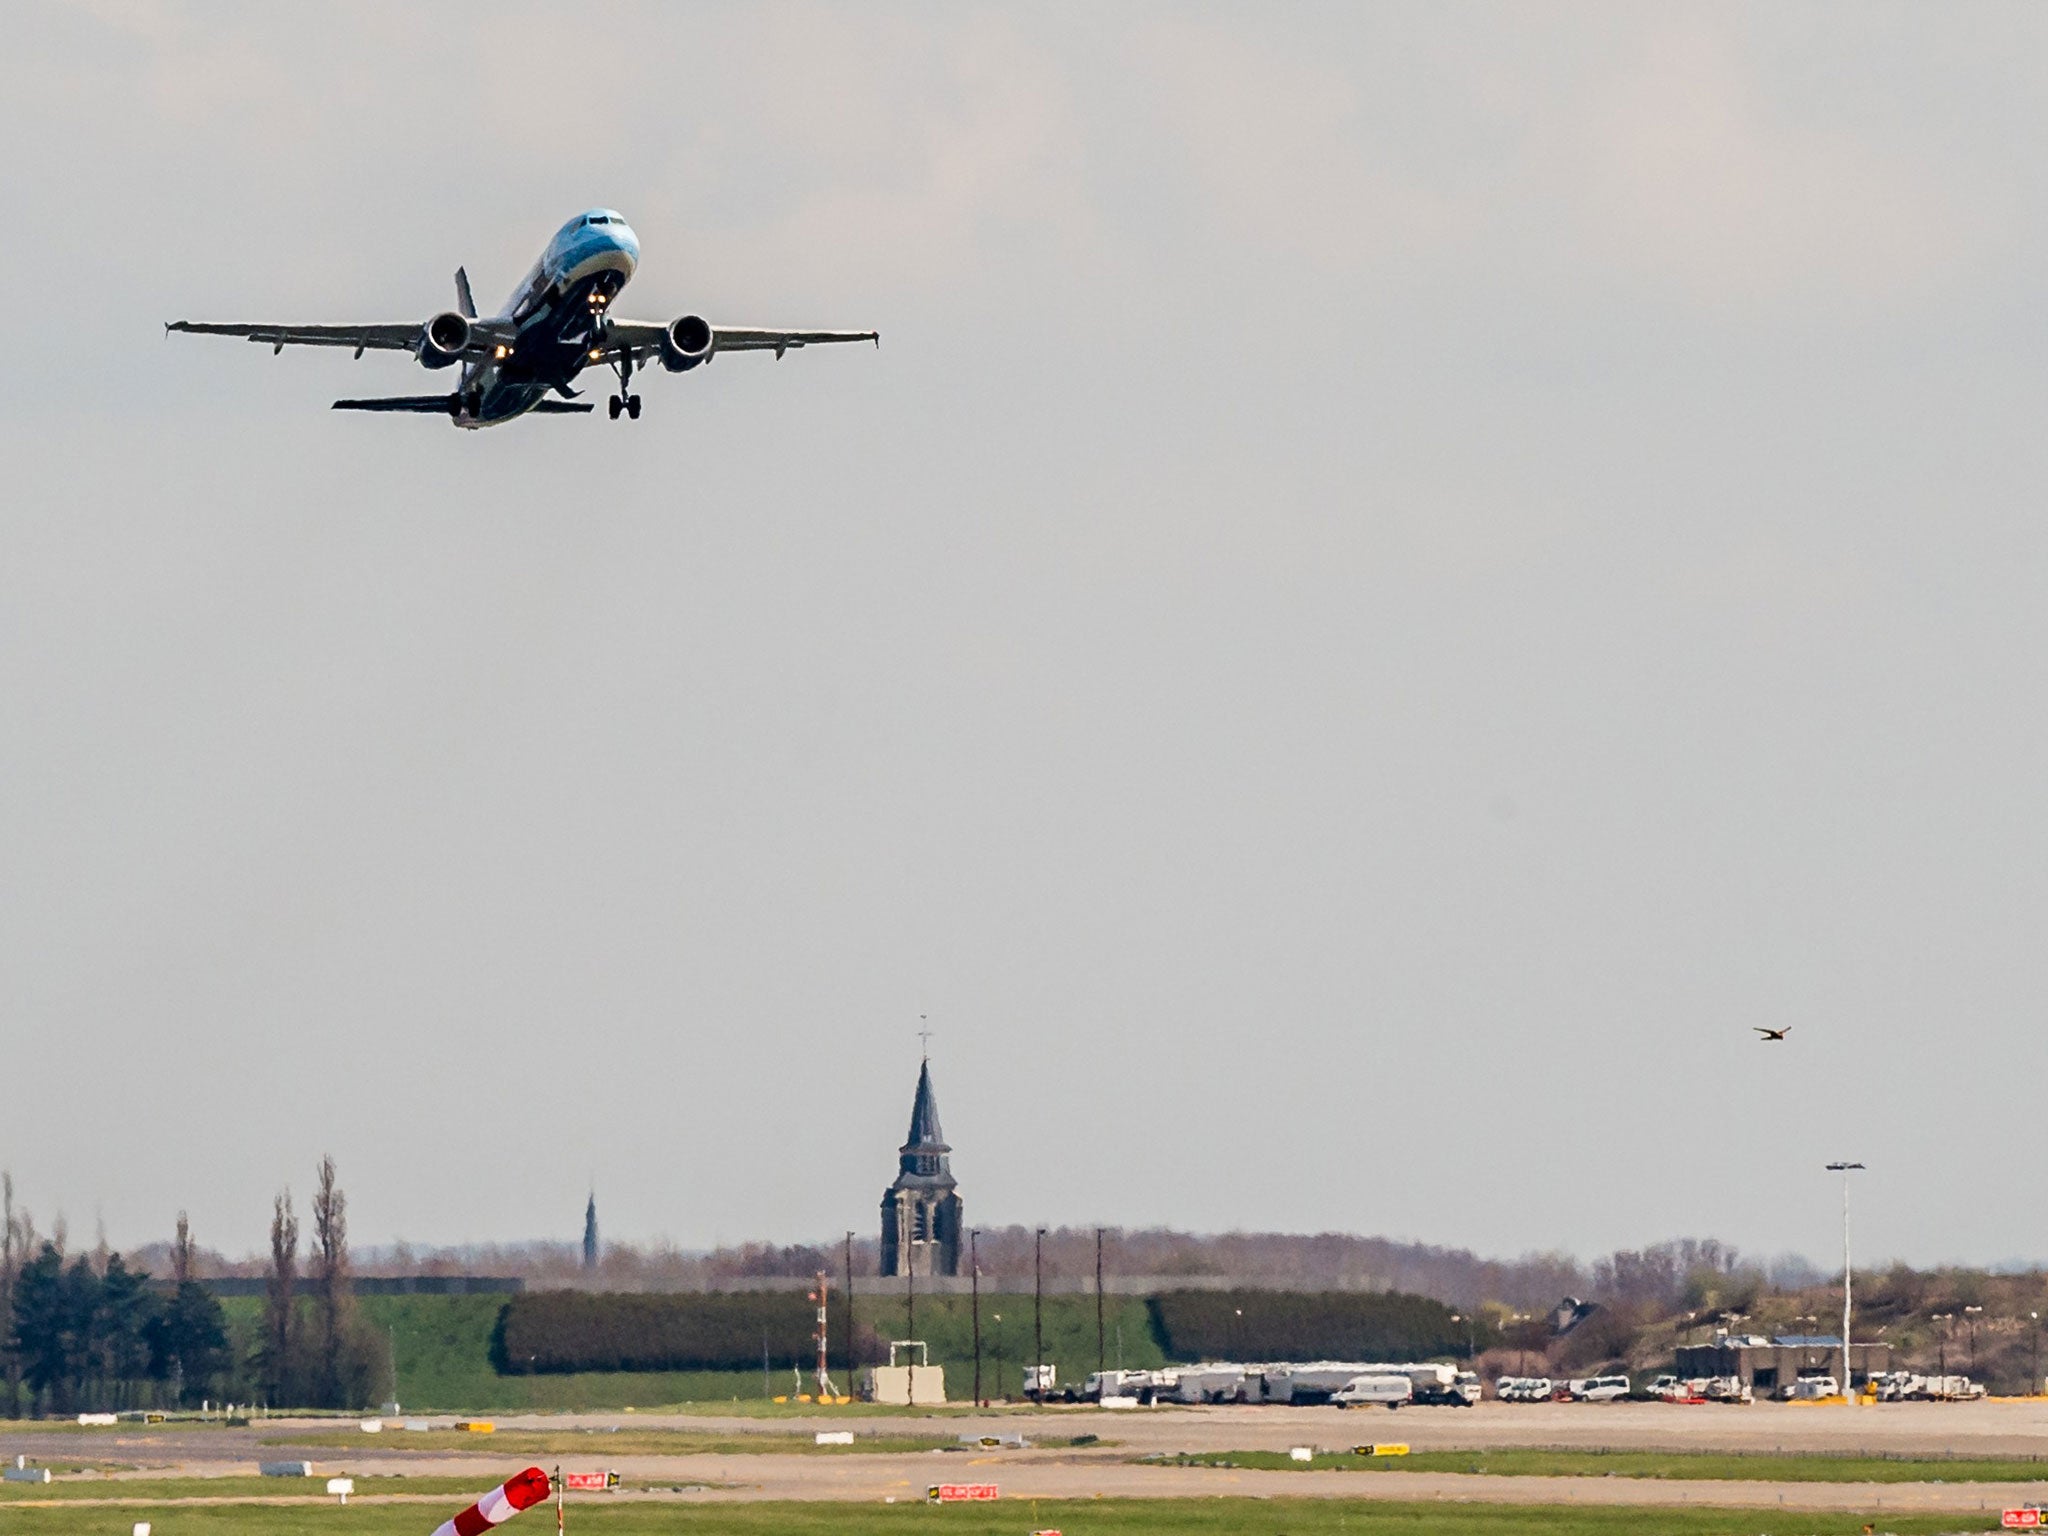 A Brussels Airlines plane takes off at Brussels Airport